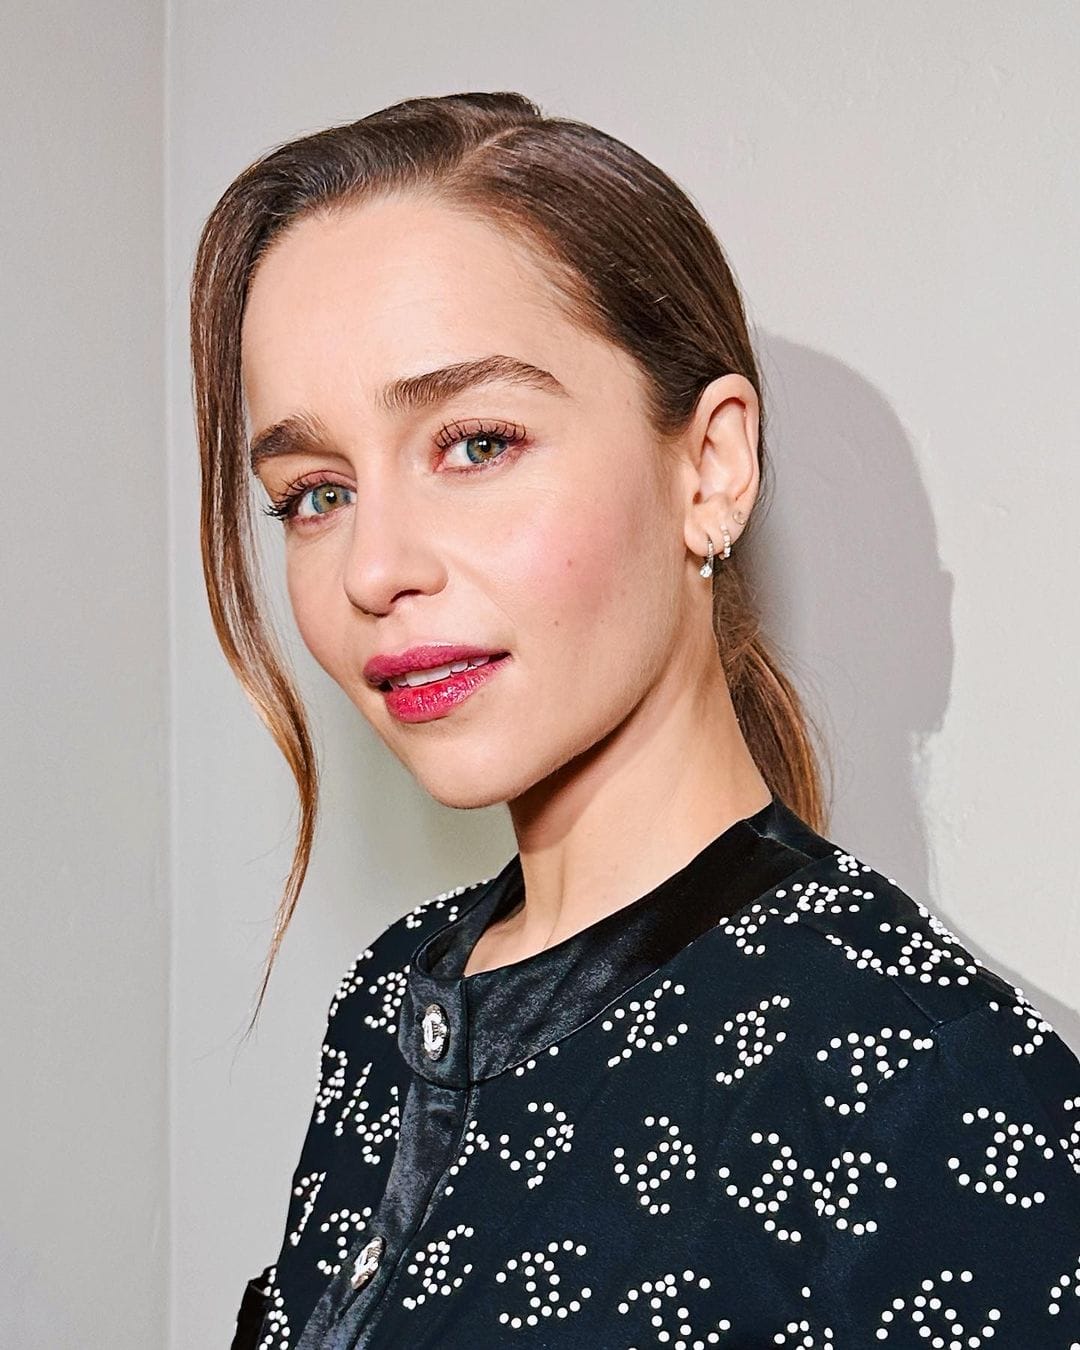 Read more about the article Who is Emilia Clarke? Biography, Age, Height, Husband & Net Worth